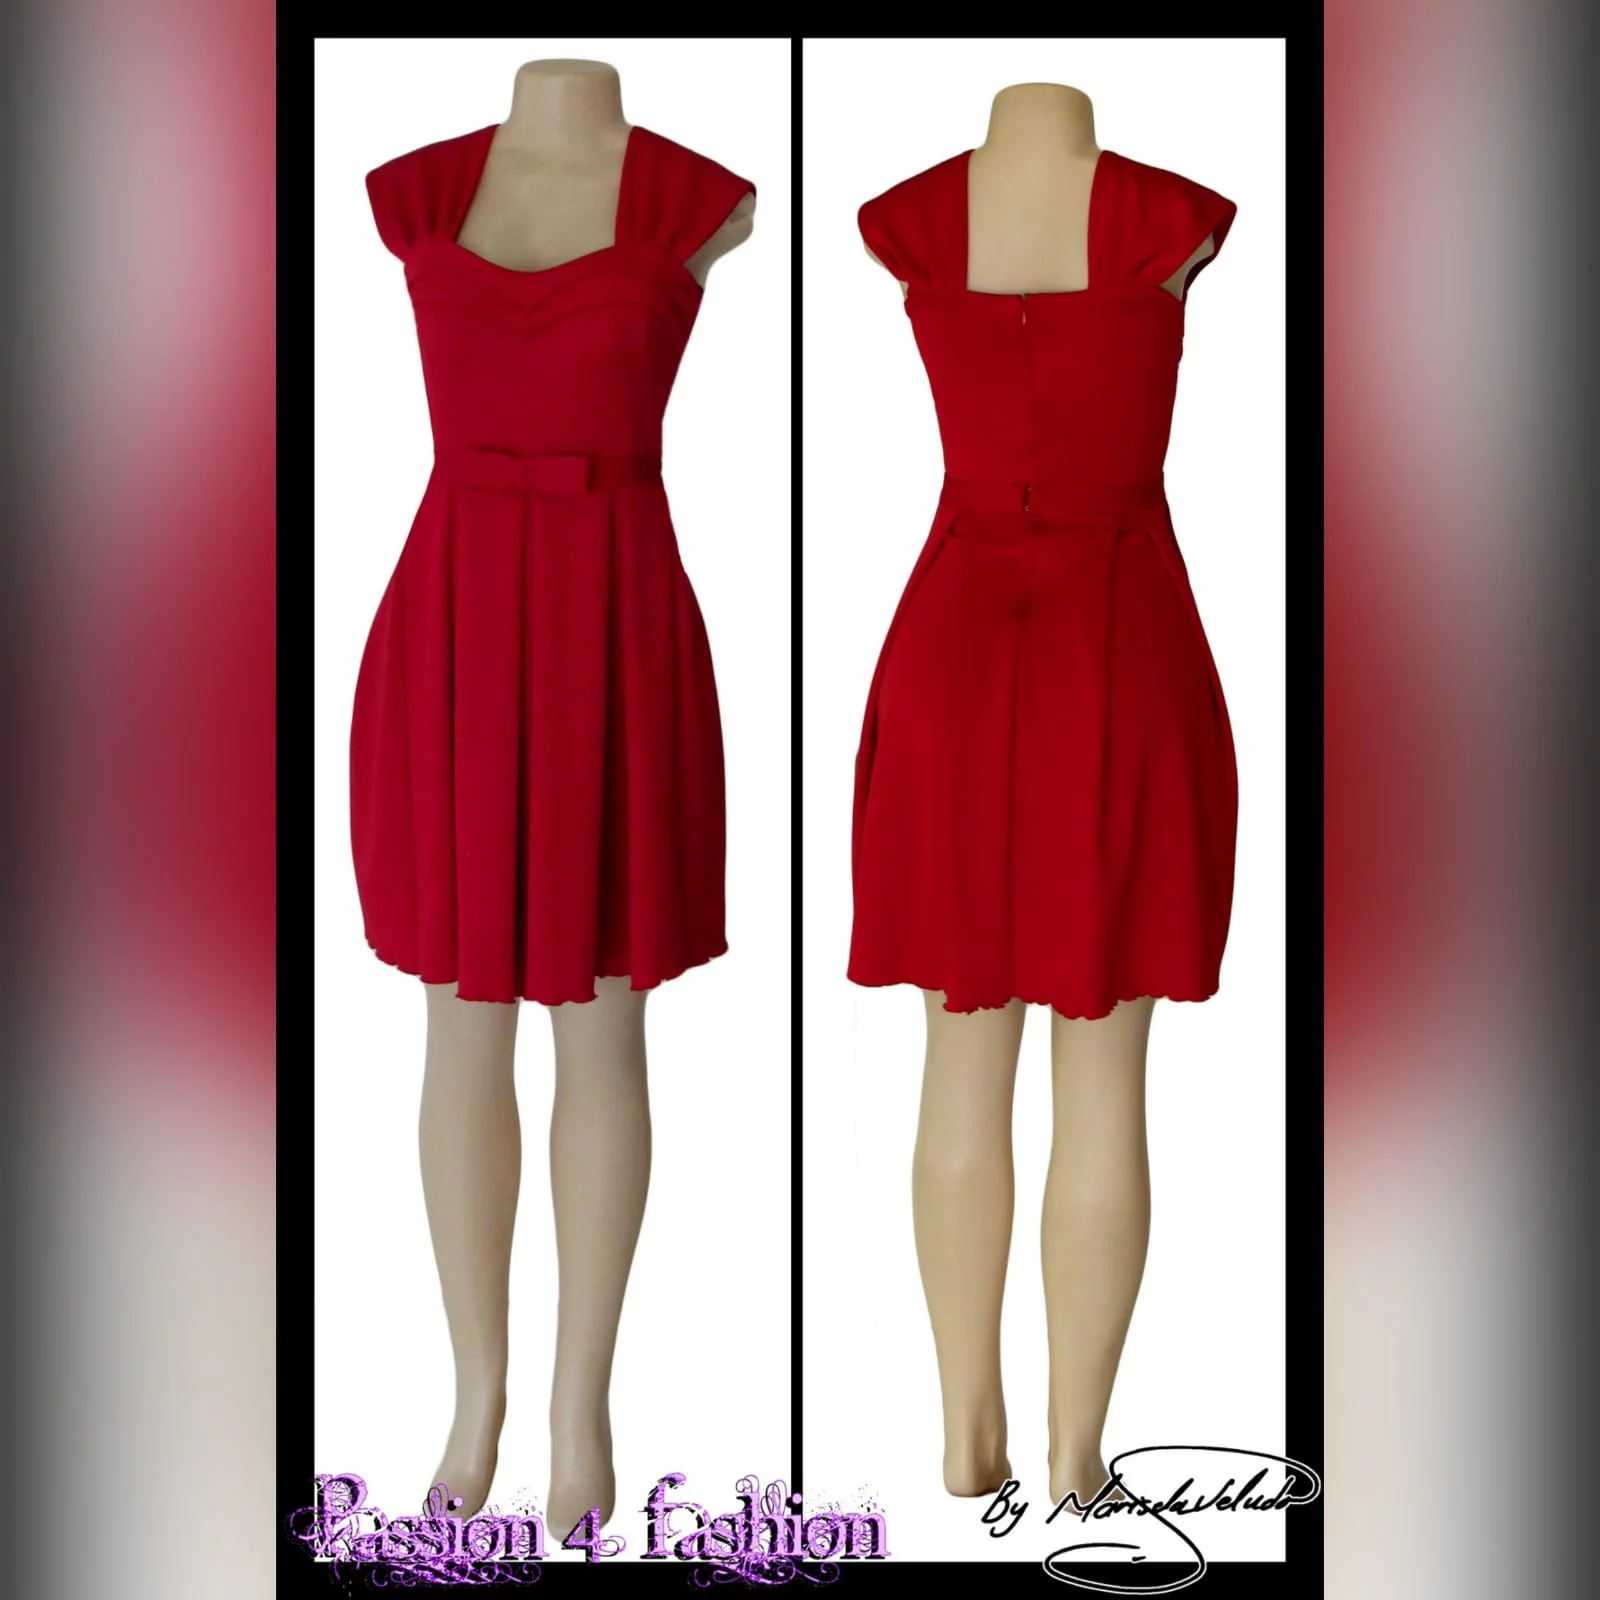 Short red pleated evening dress 2 short red pleated evening dress with a pleated sweetheart neckline and a detachable belt with bow detail